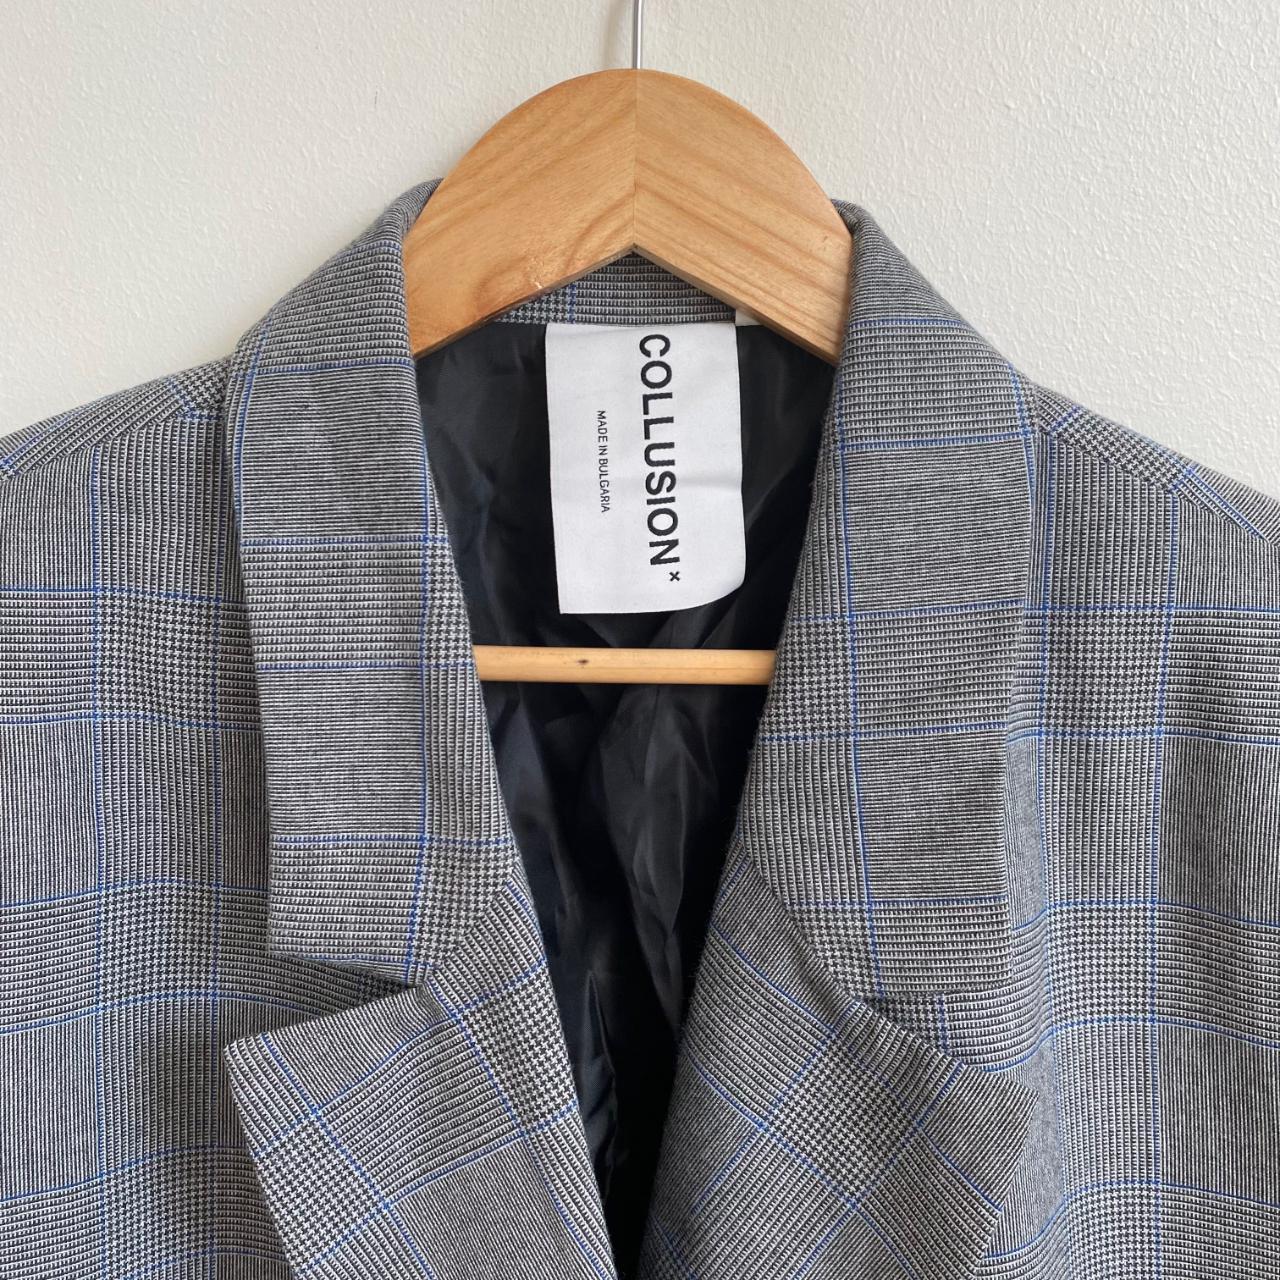 COLLUSION unisex oversized blazer in gray, blue, and... - Depop